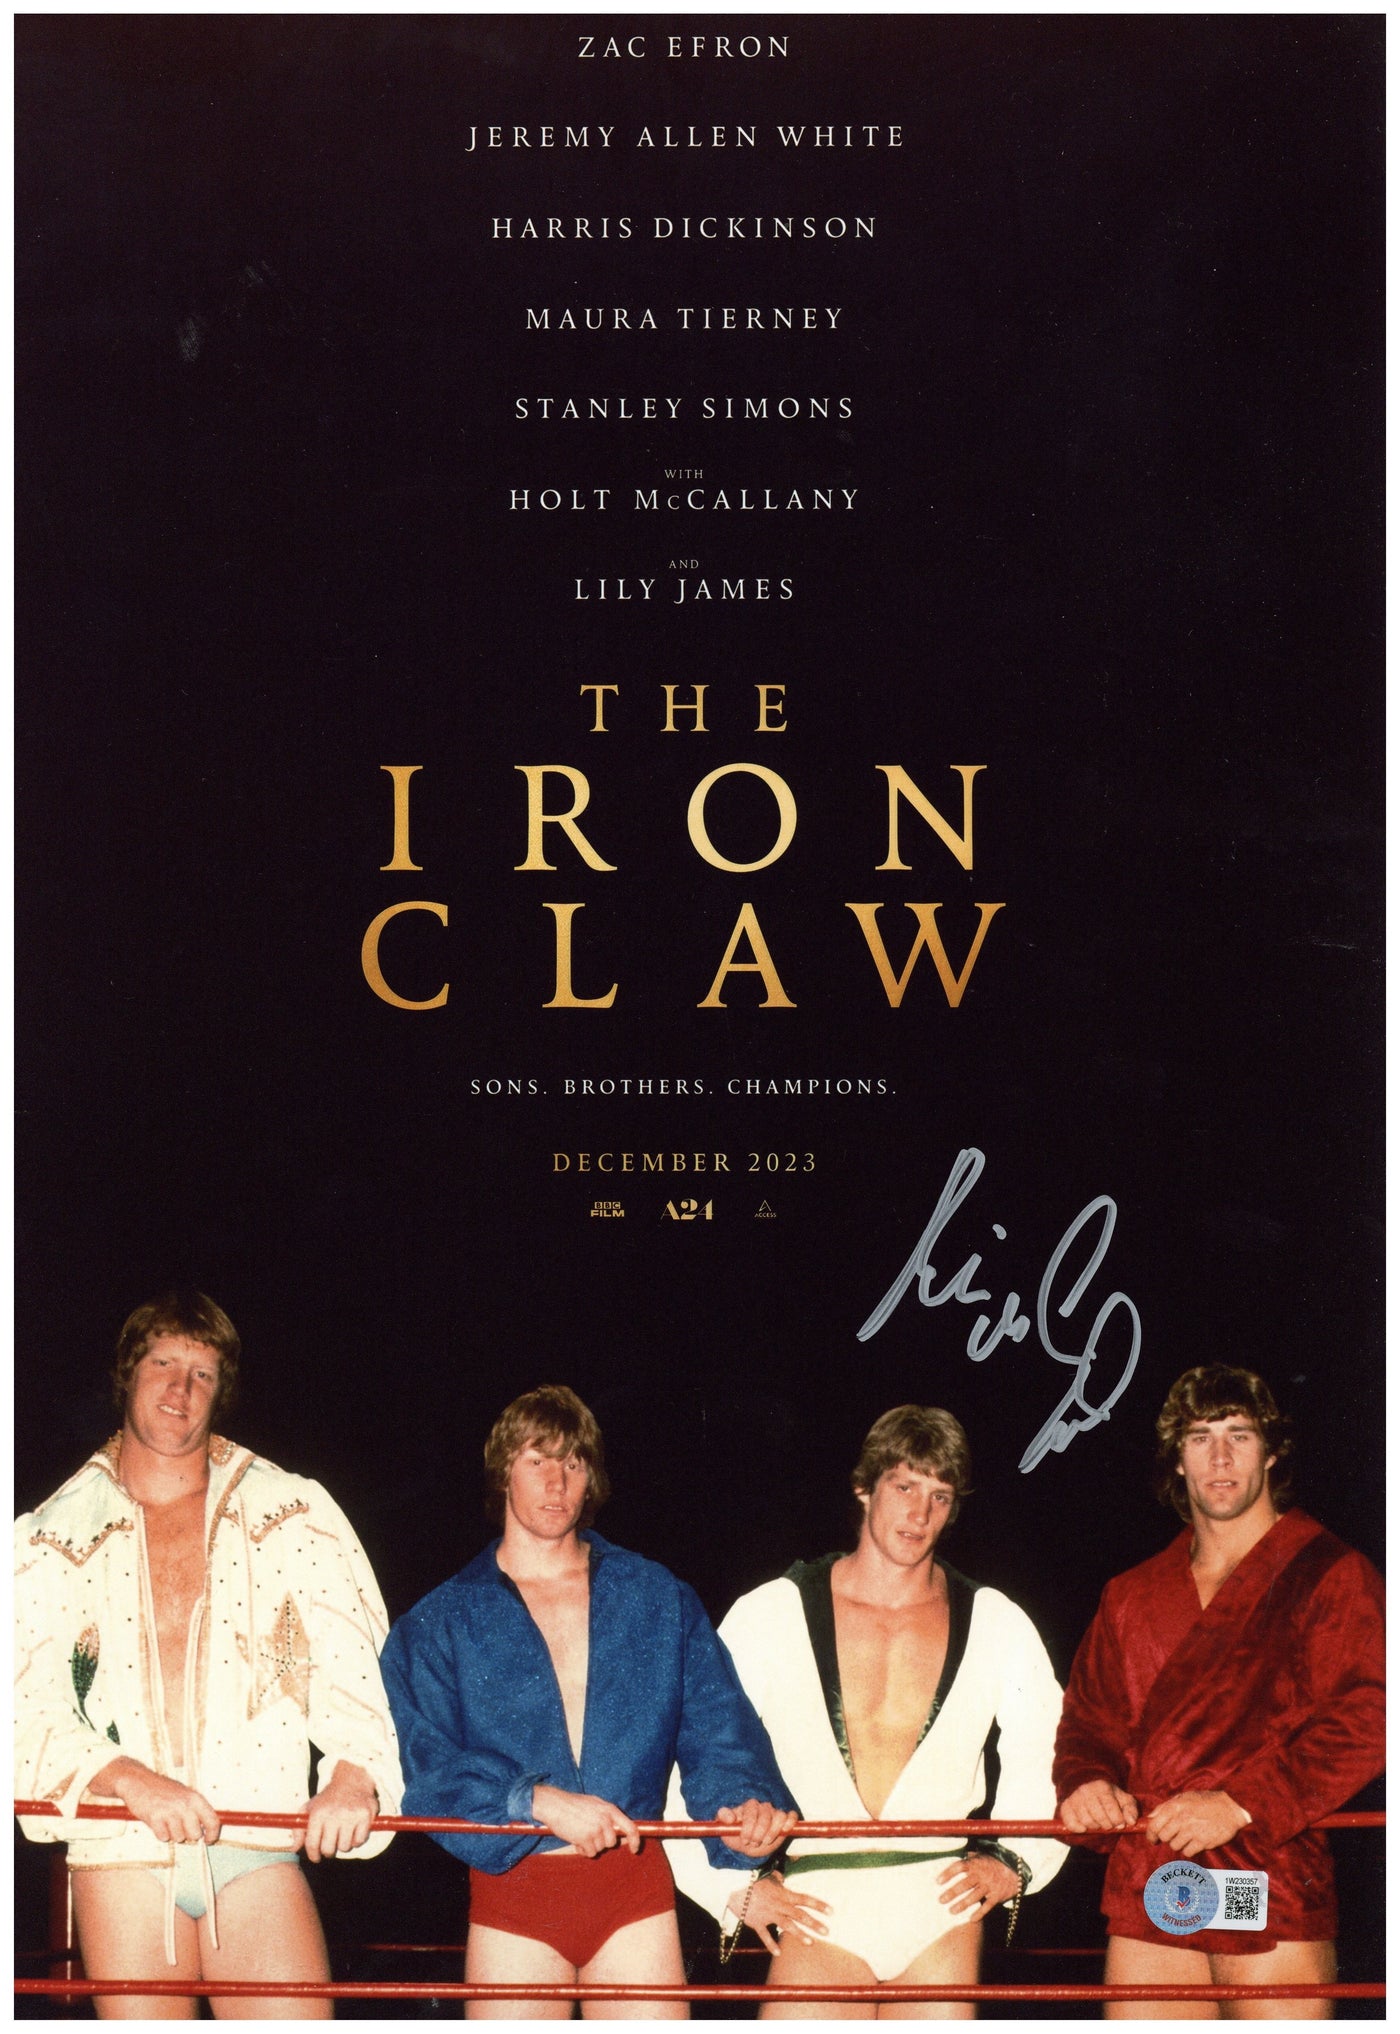 SPECIAL Kevin Von Erich Signed 12x18 Photo Iron Claw Autographed BAS COA #2